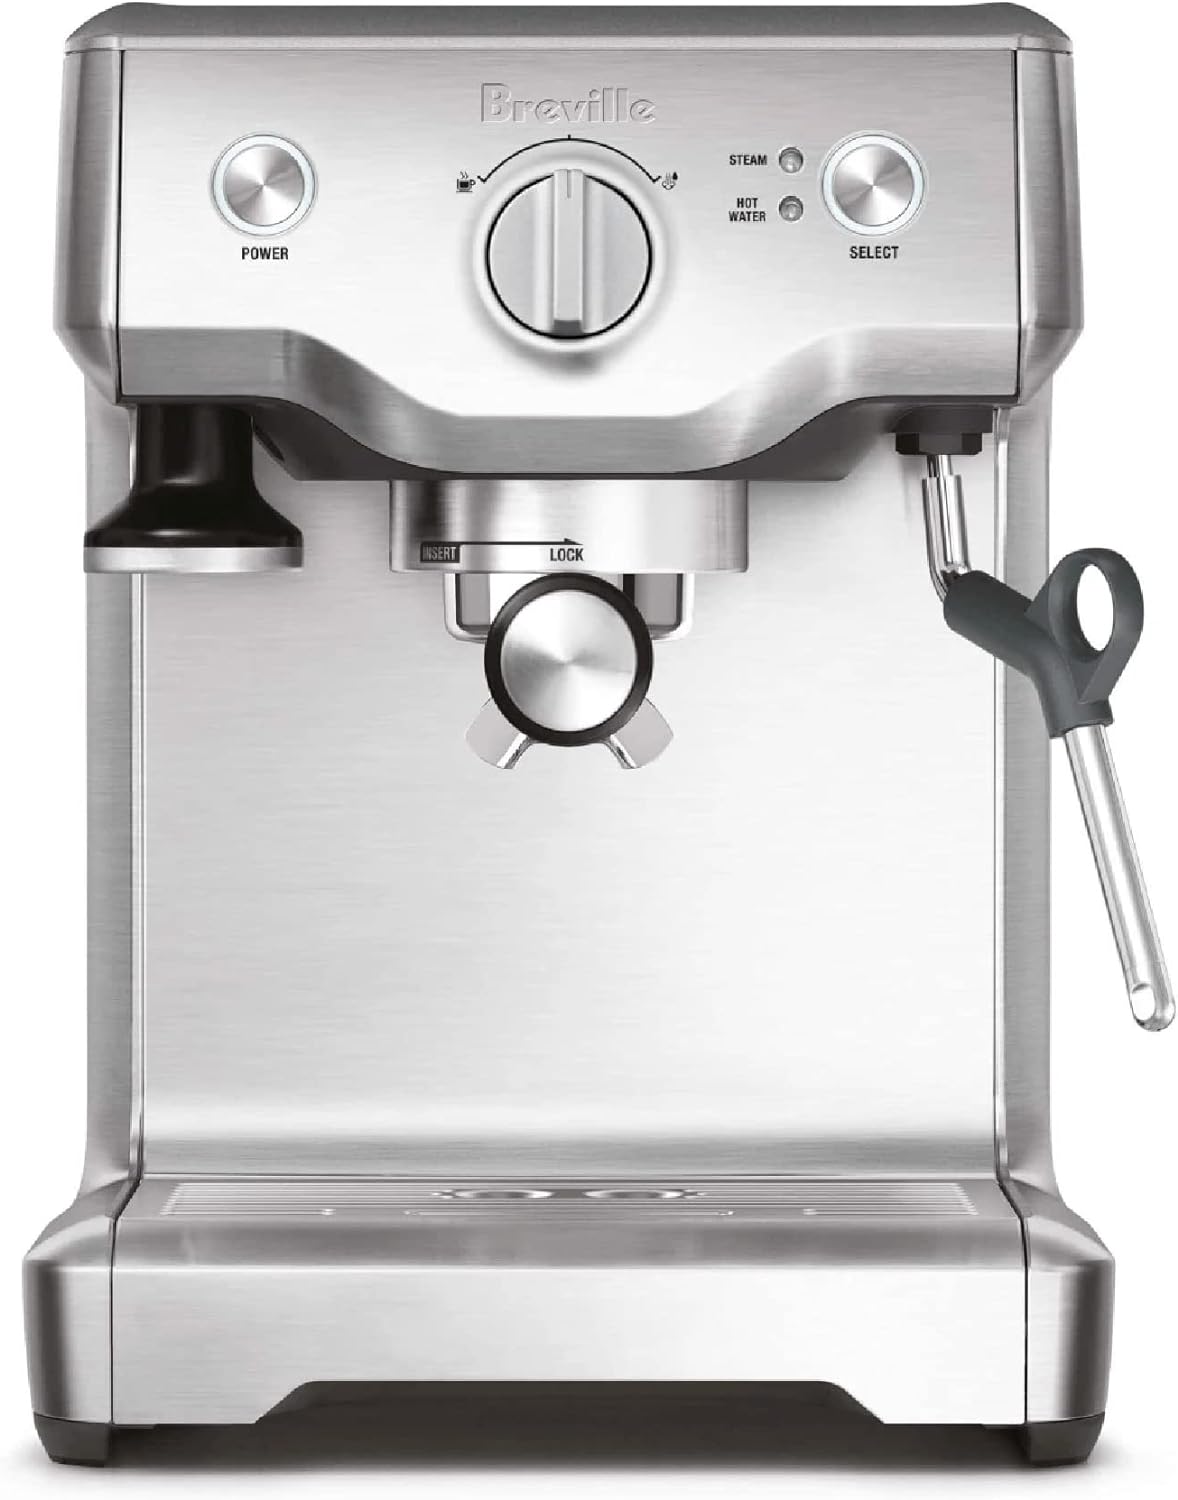 Breville Duo Temp Pro Espresso Machine BES810BSS, Brushed Stainless Steel $399